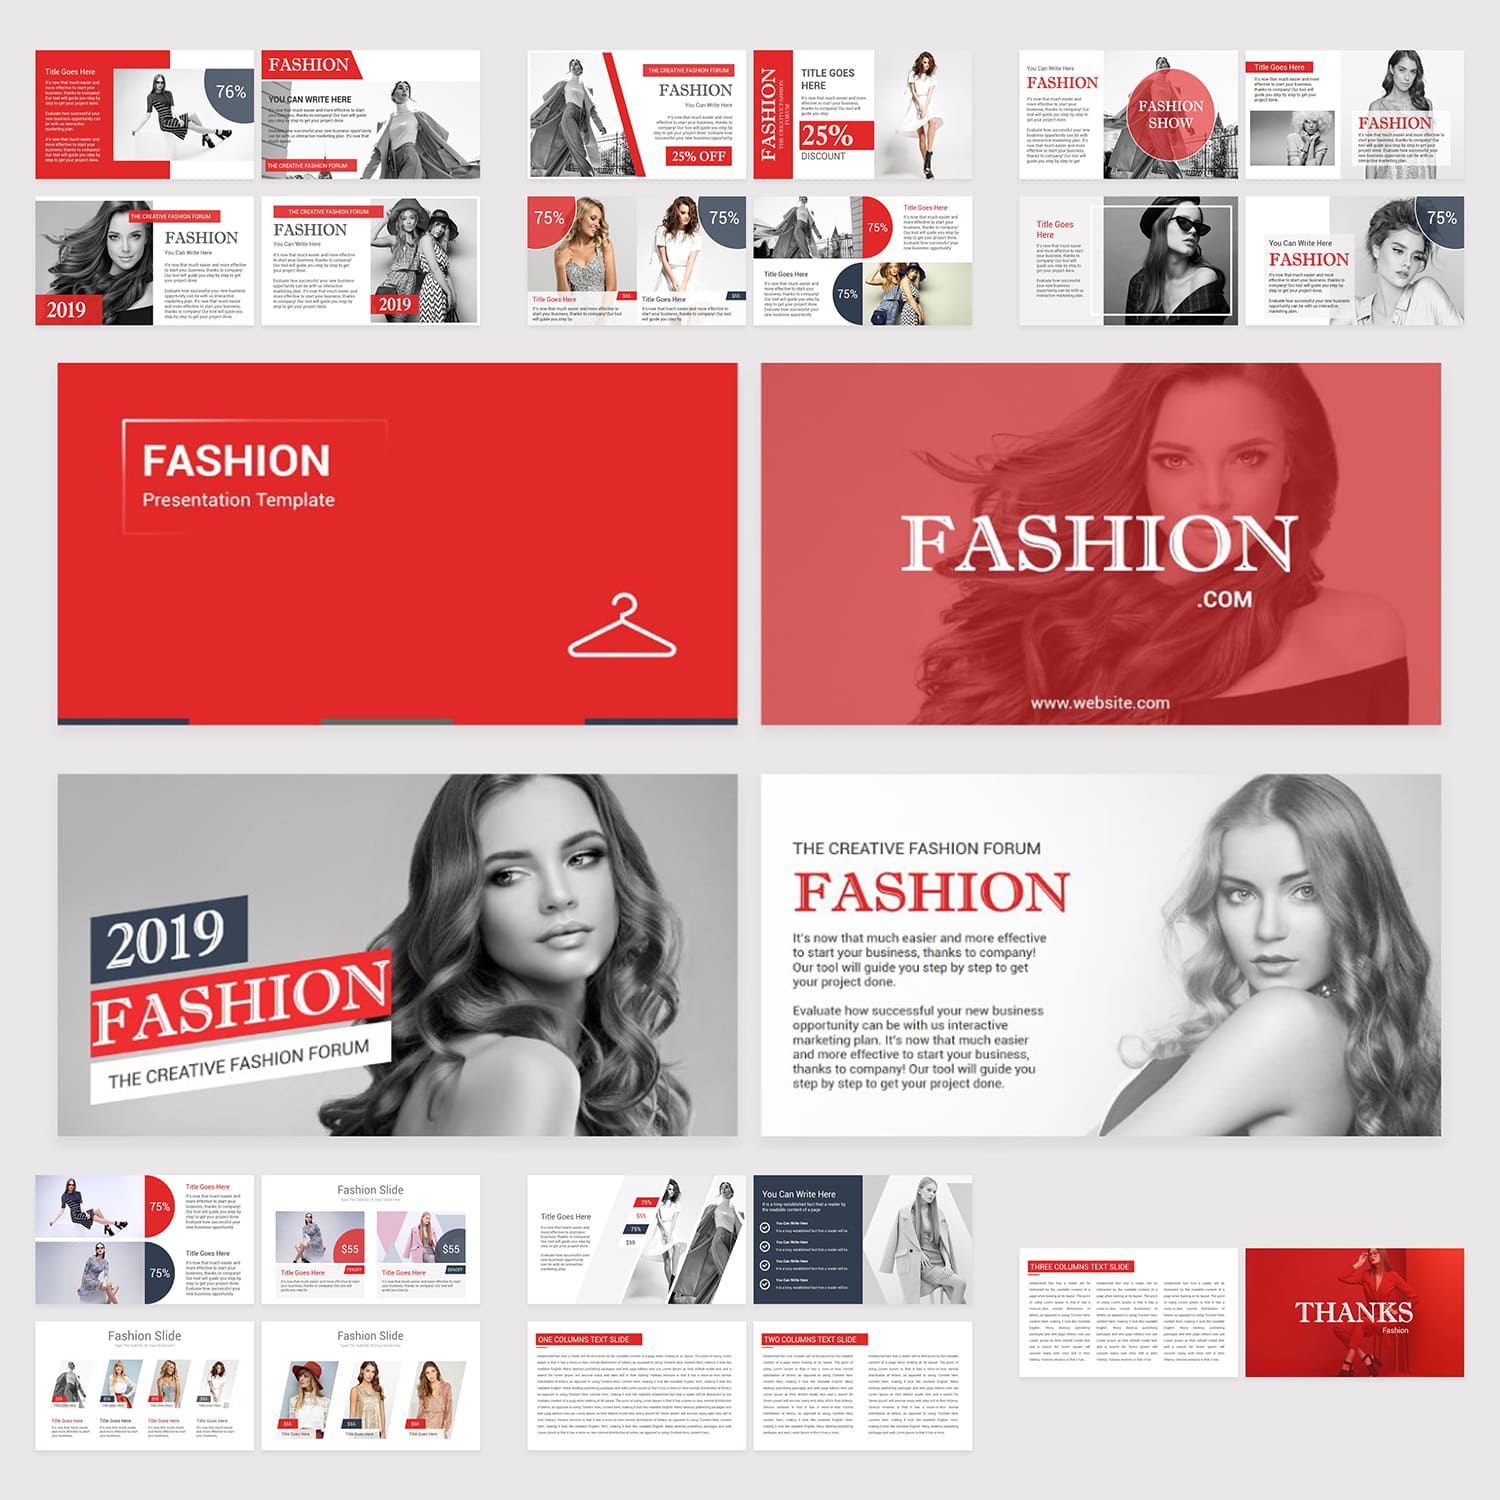 Fashion PowerPoint Presentation cover.